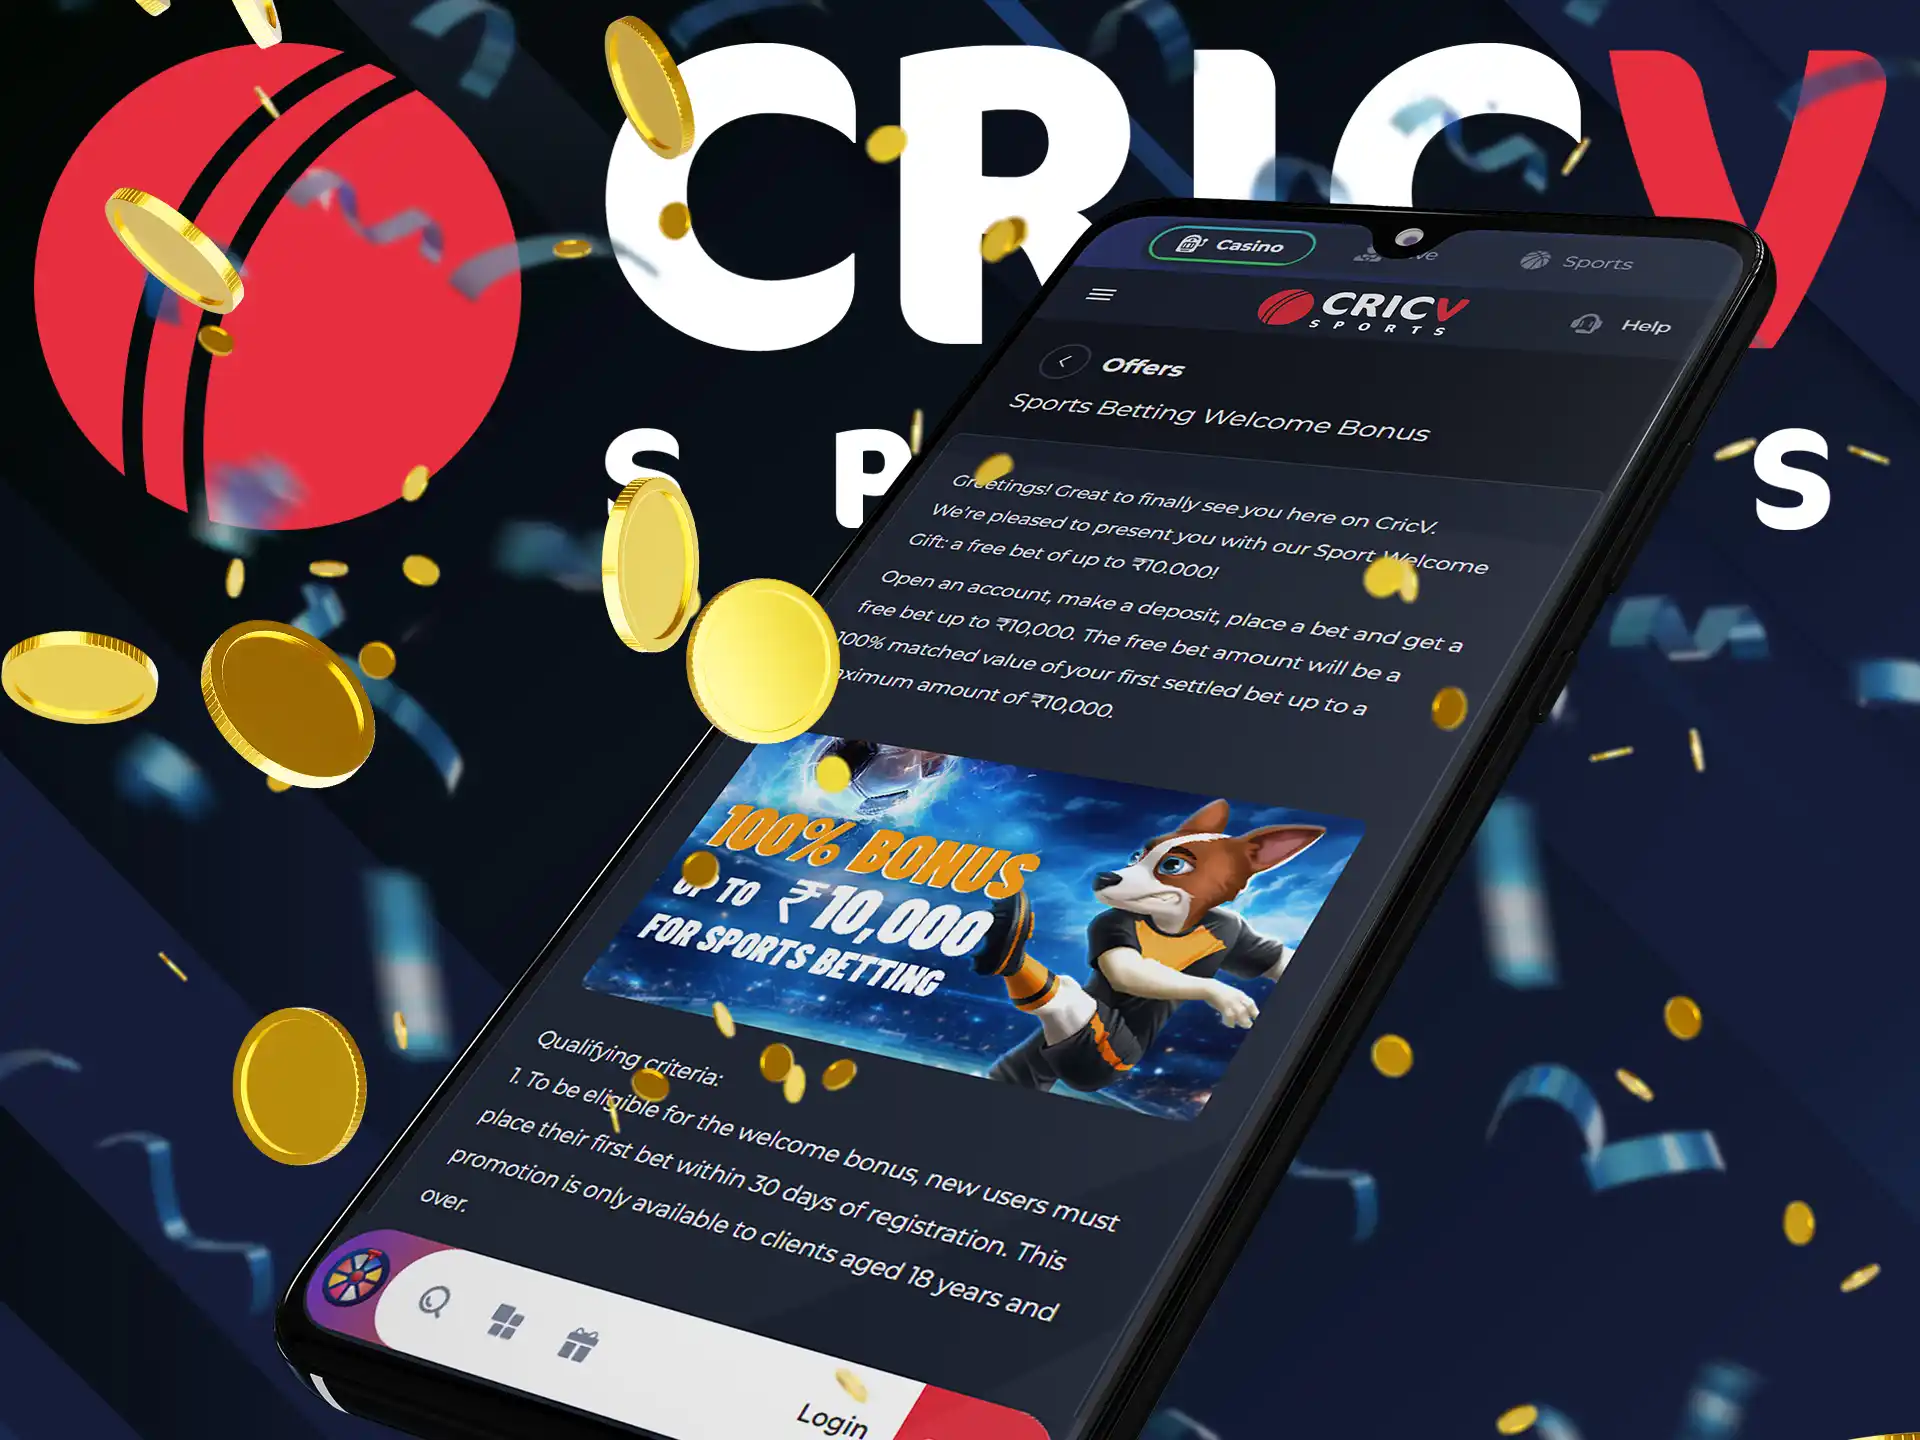 CricV app gives all new users a welcome bonus on sports.